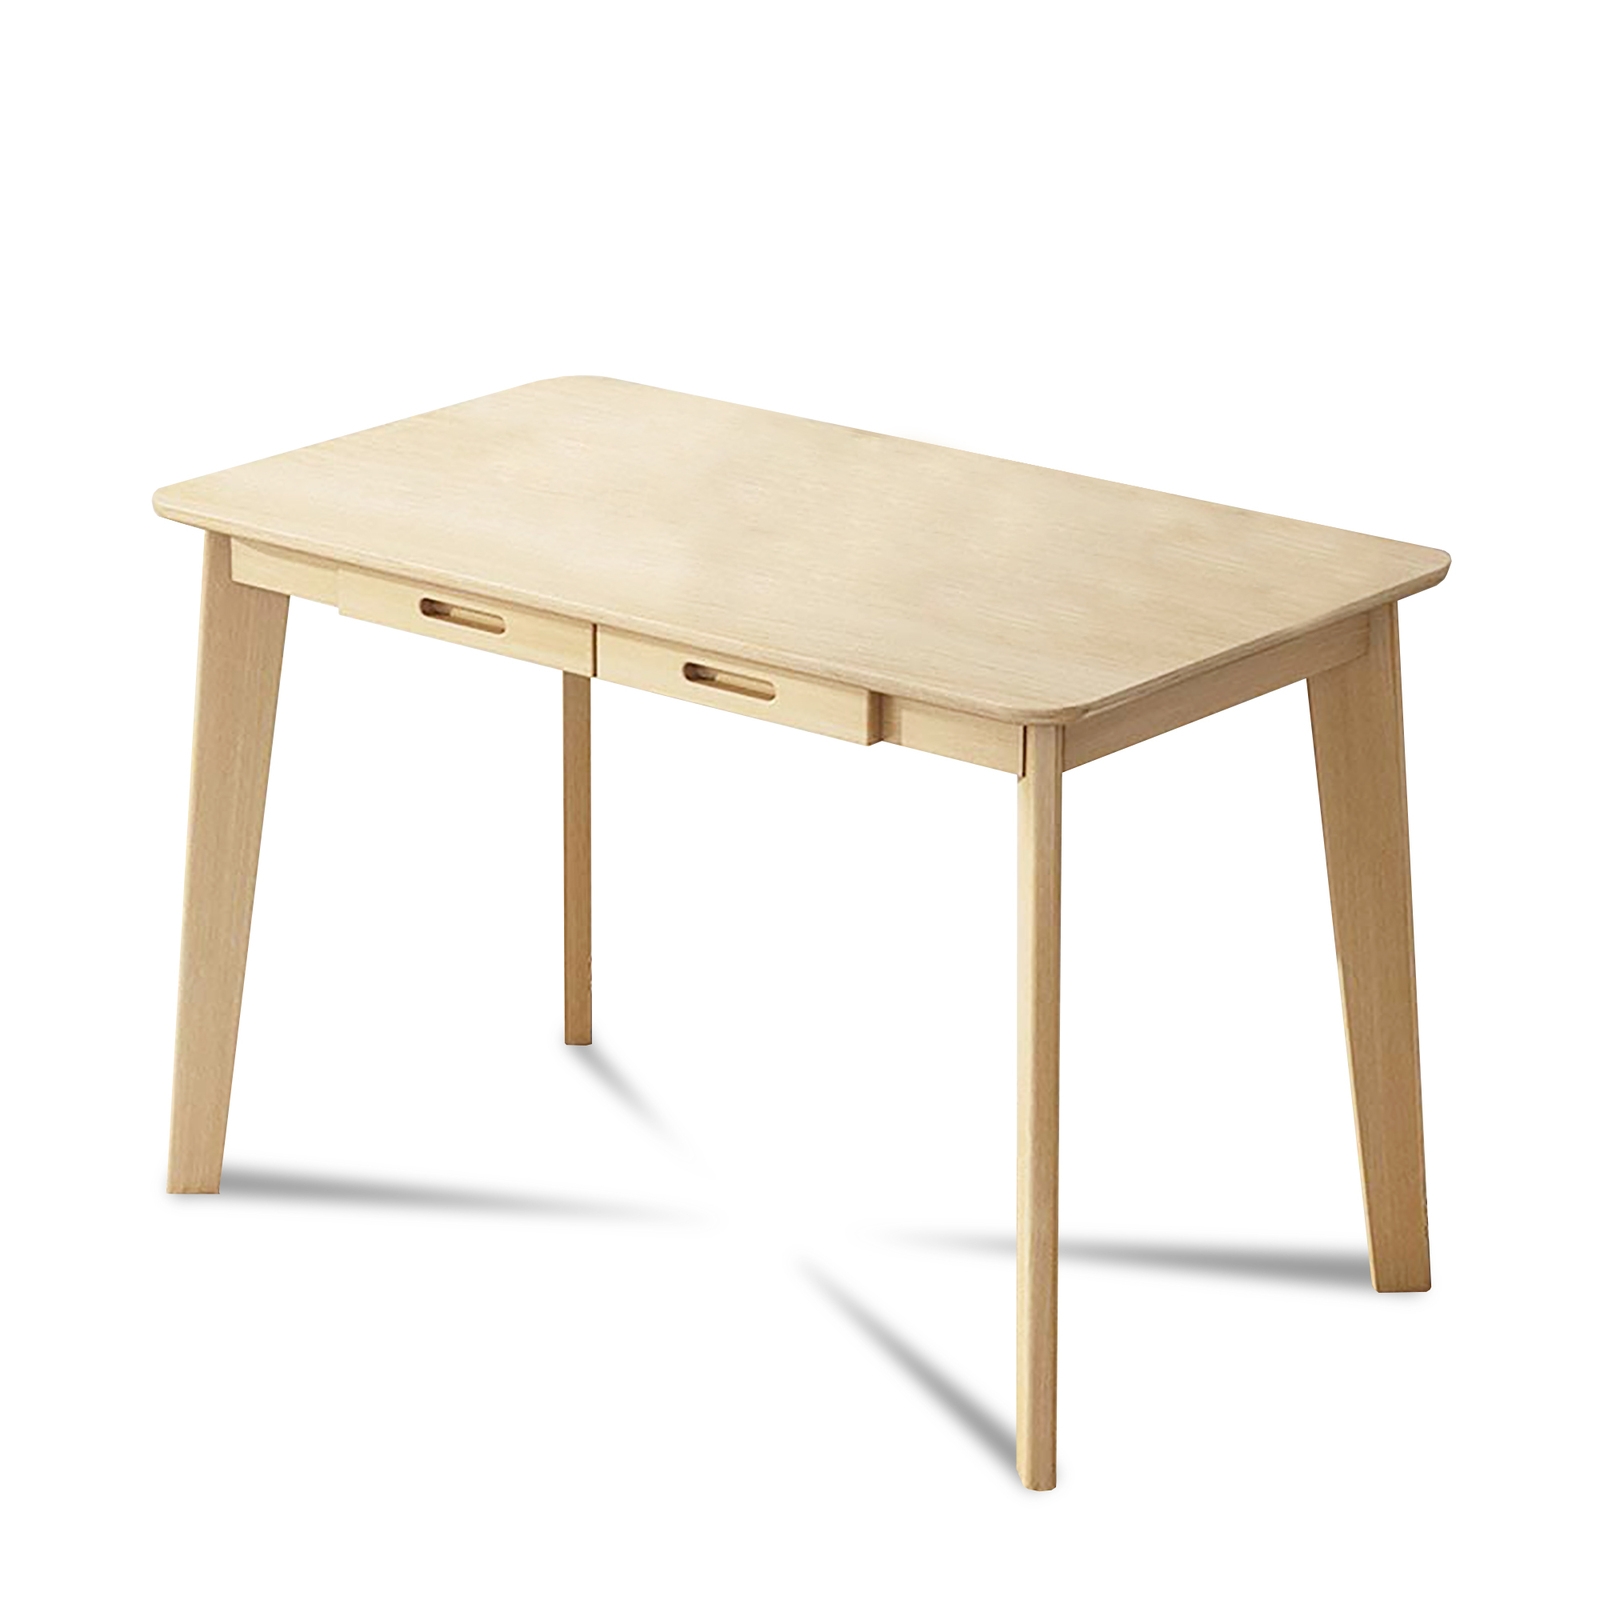 MIUZ Computer Desk Office Study Student Wood Table Drawer Nordic Natural